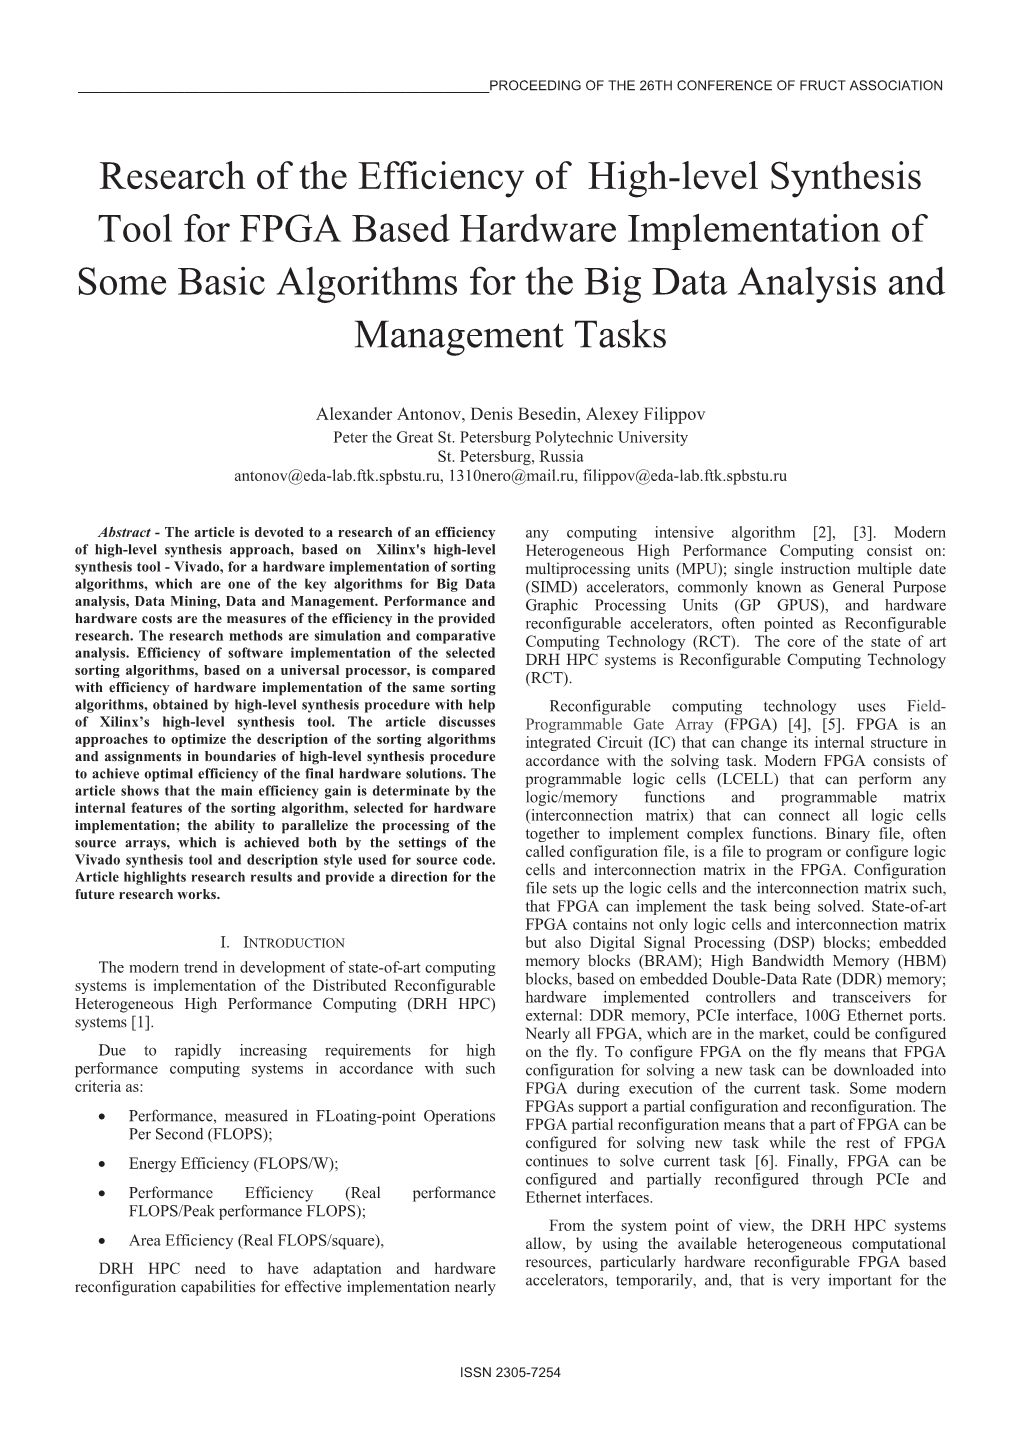 Research of the Efficiency of High-Level Synthesis Tool for FPGA Based Hardware Implementation of Some Basic Algorithms for the Big Data Analysis and Management Tasks